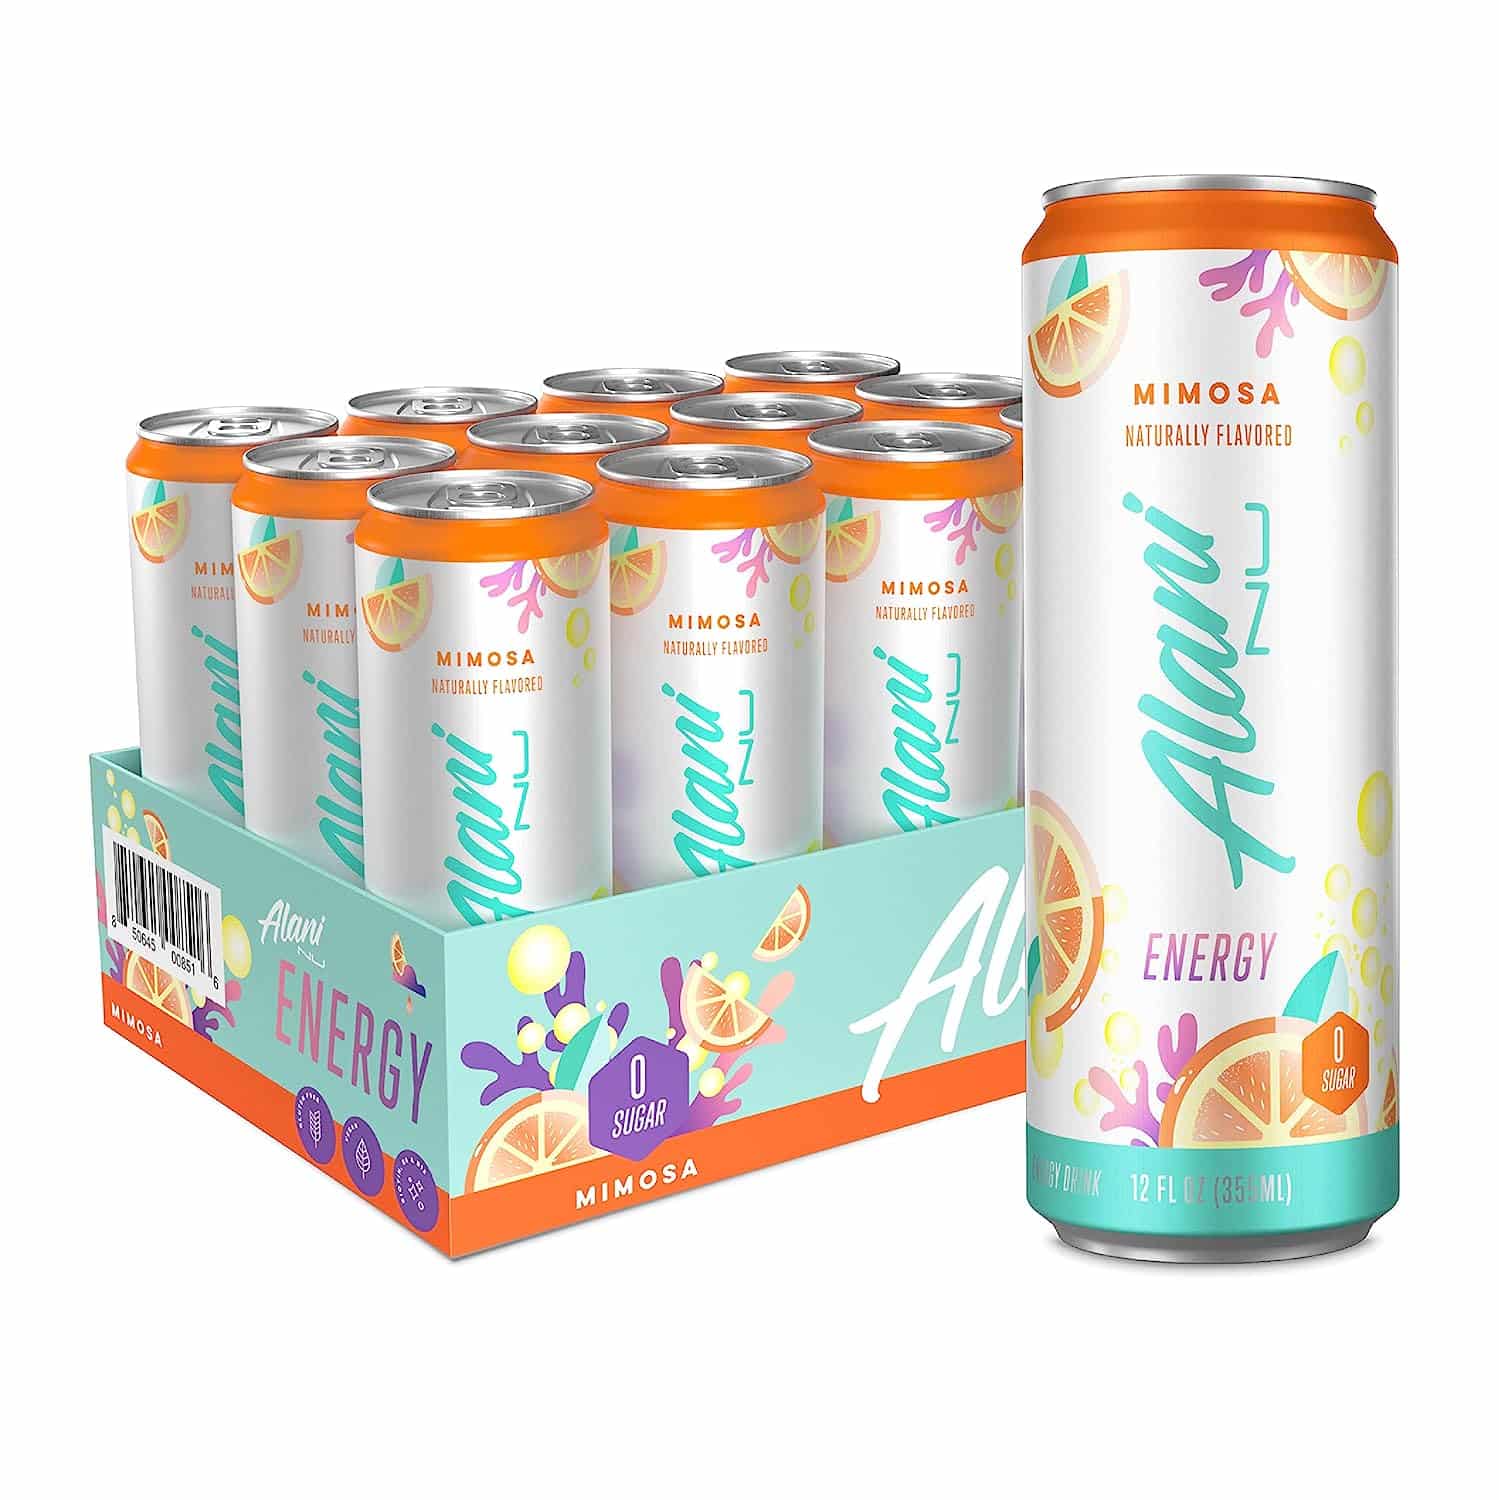 Alani Energy Drink: Ignite Your Day with Refreshing Energy